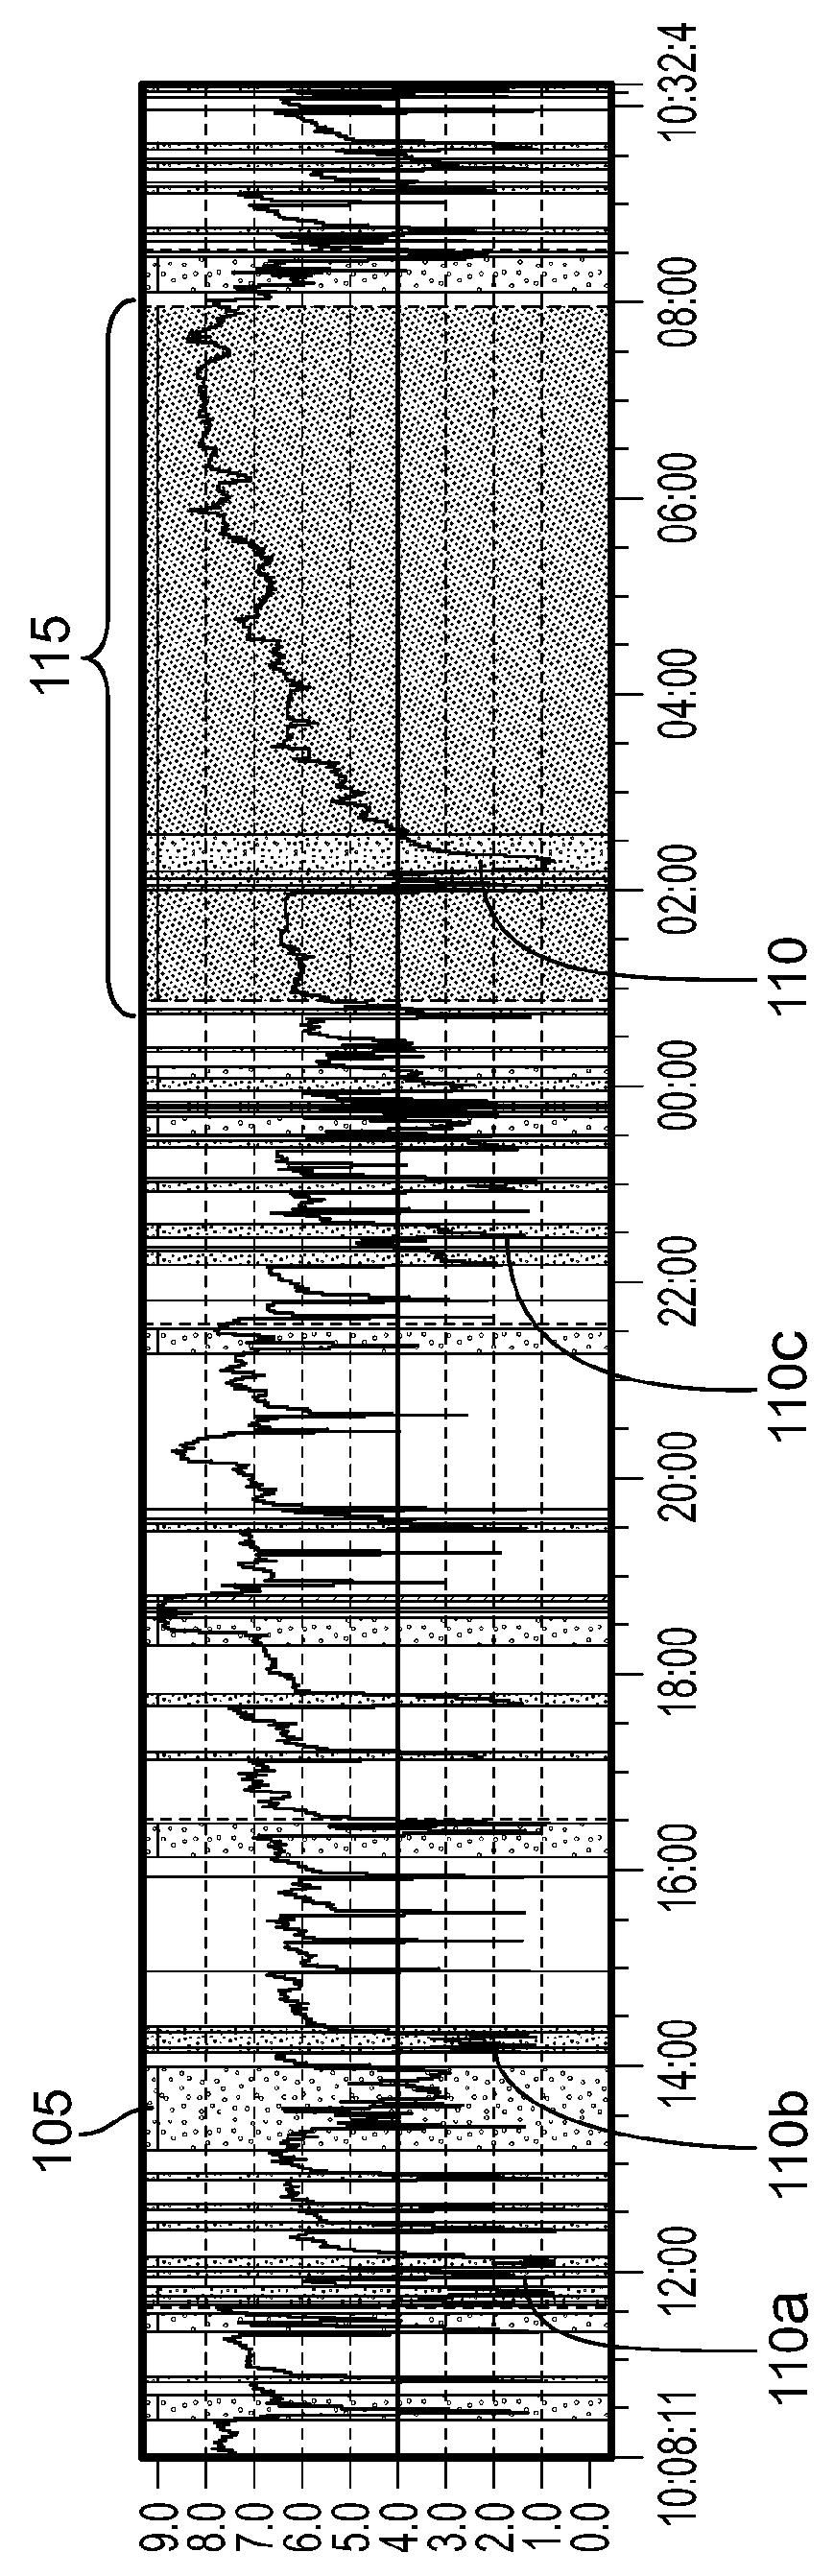 Systems and methods for treating gastroesophageal reflux disease